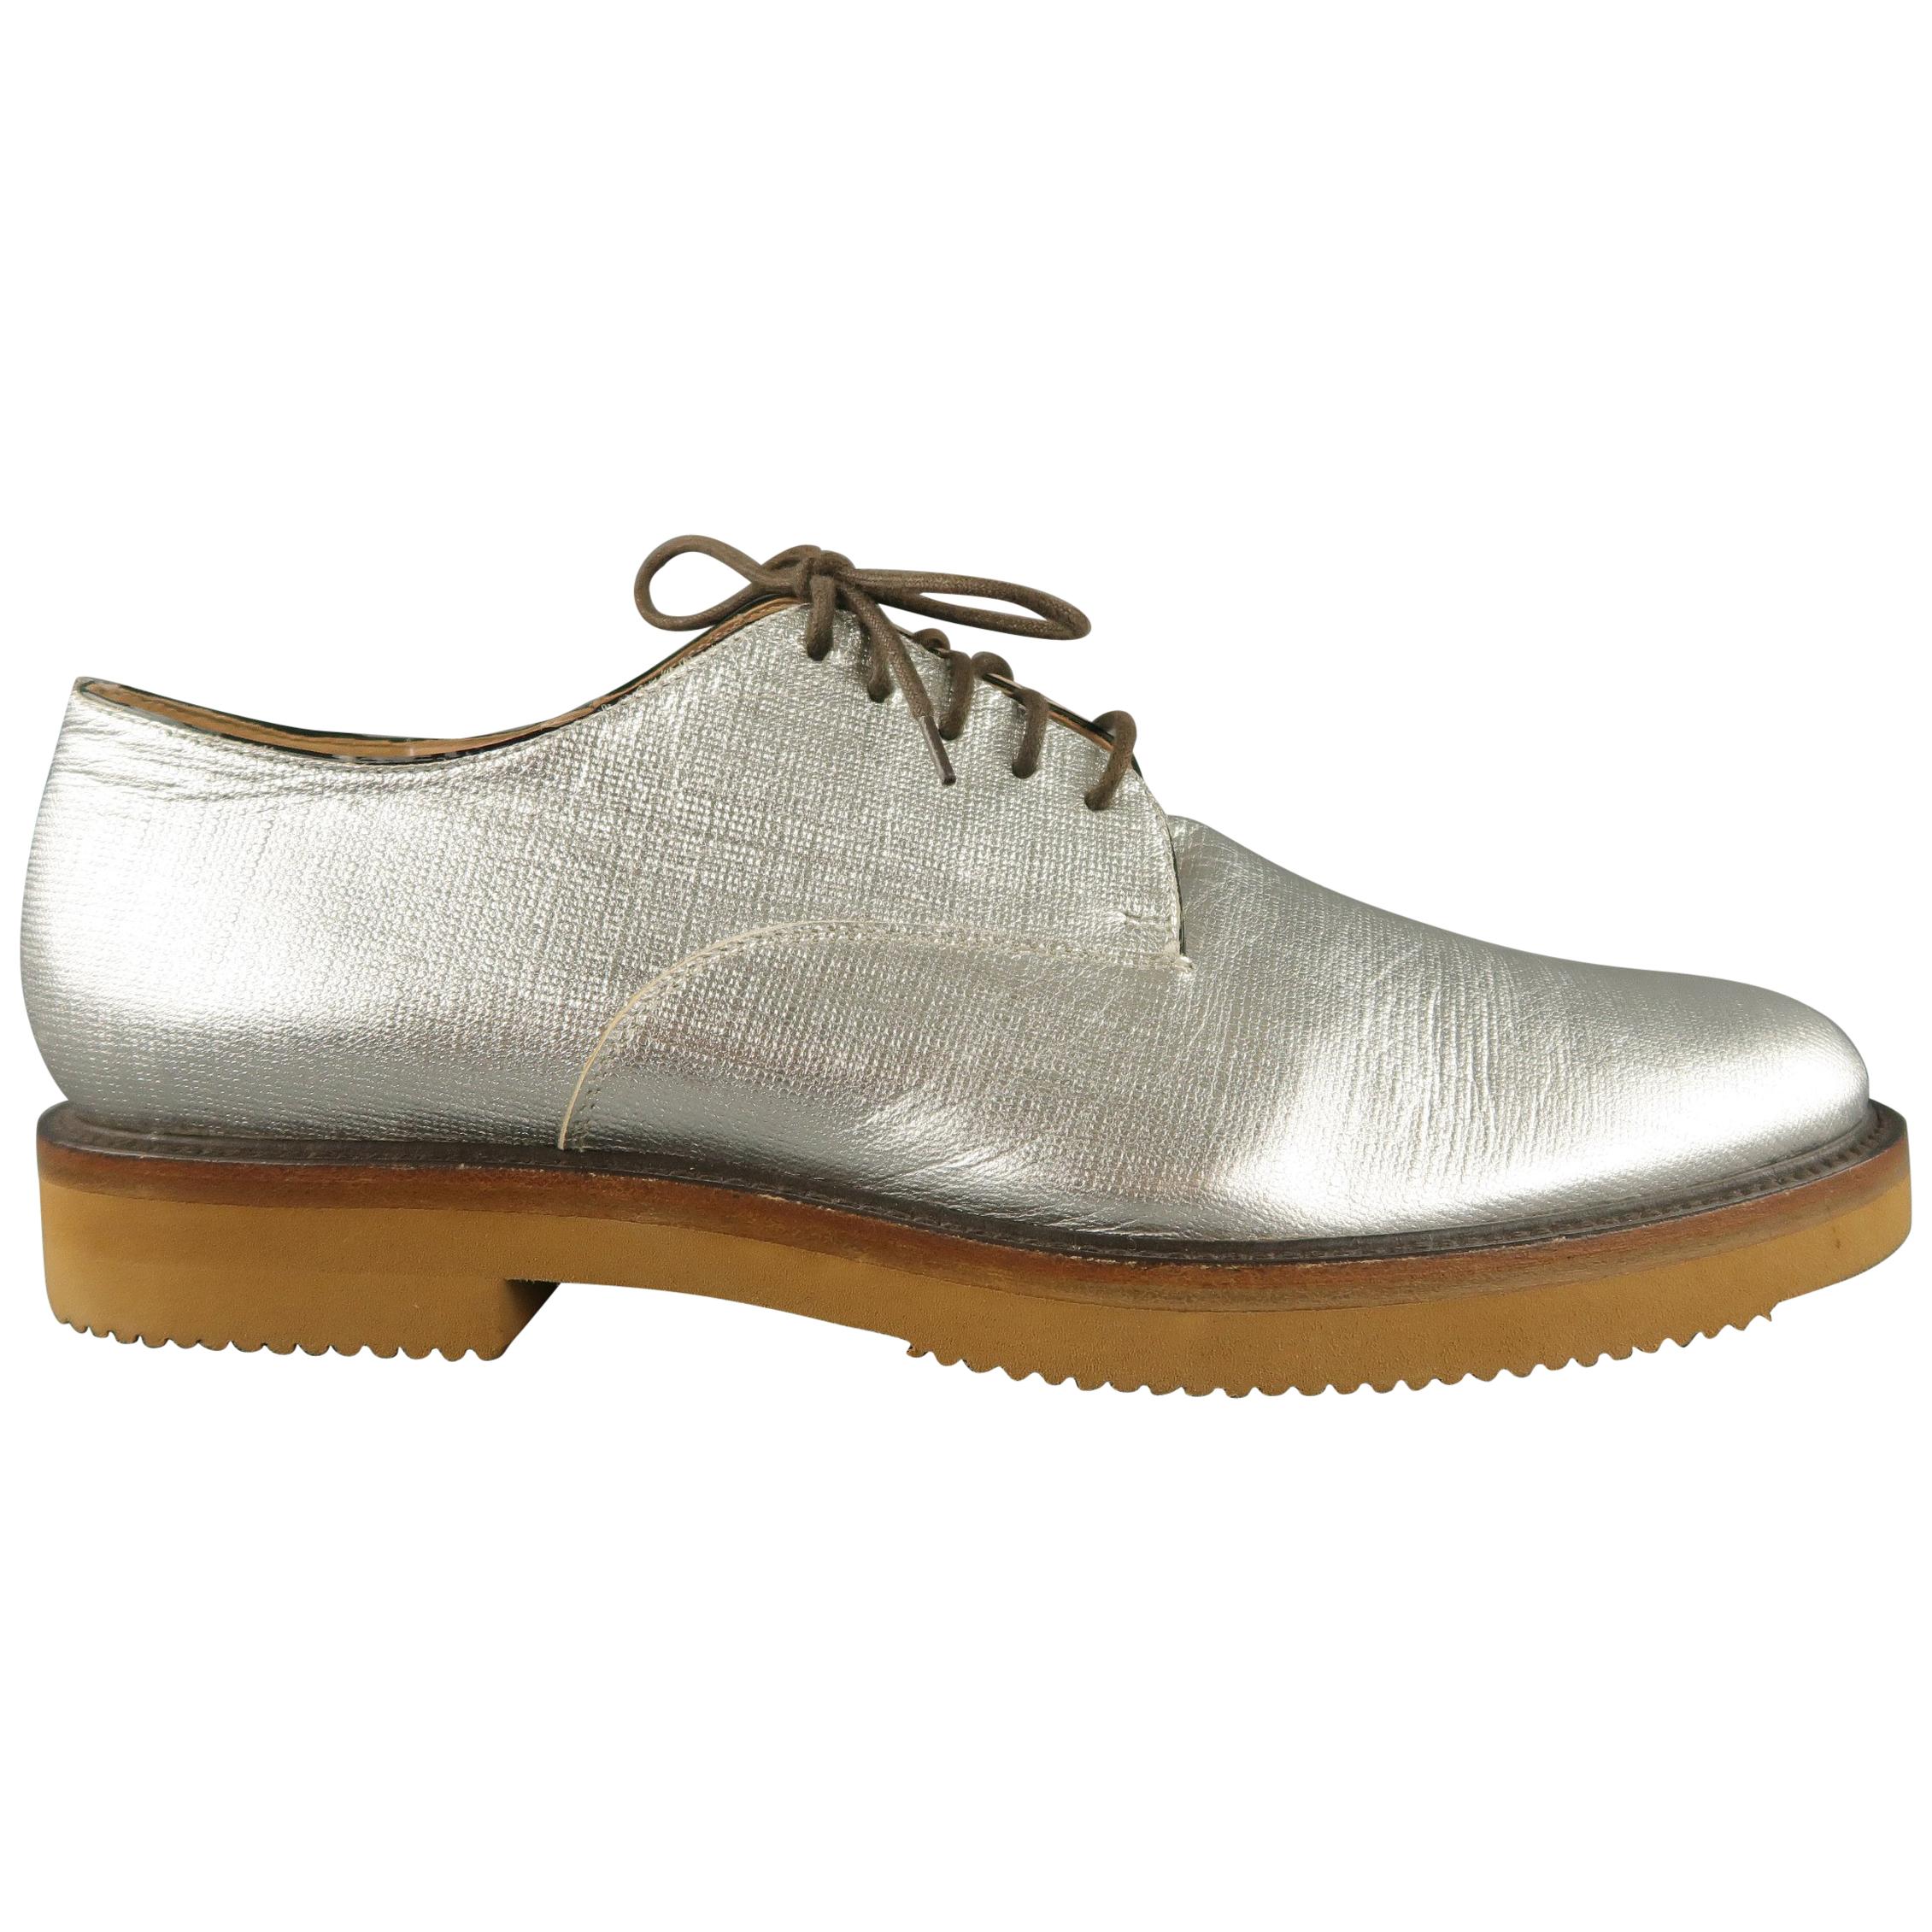 DRIES VAN NOTEN Size 7 Silver Solid Suede Crepe Sole Lace Up